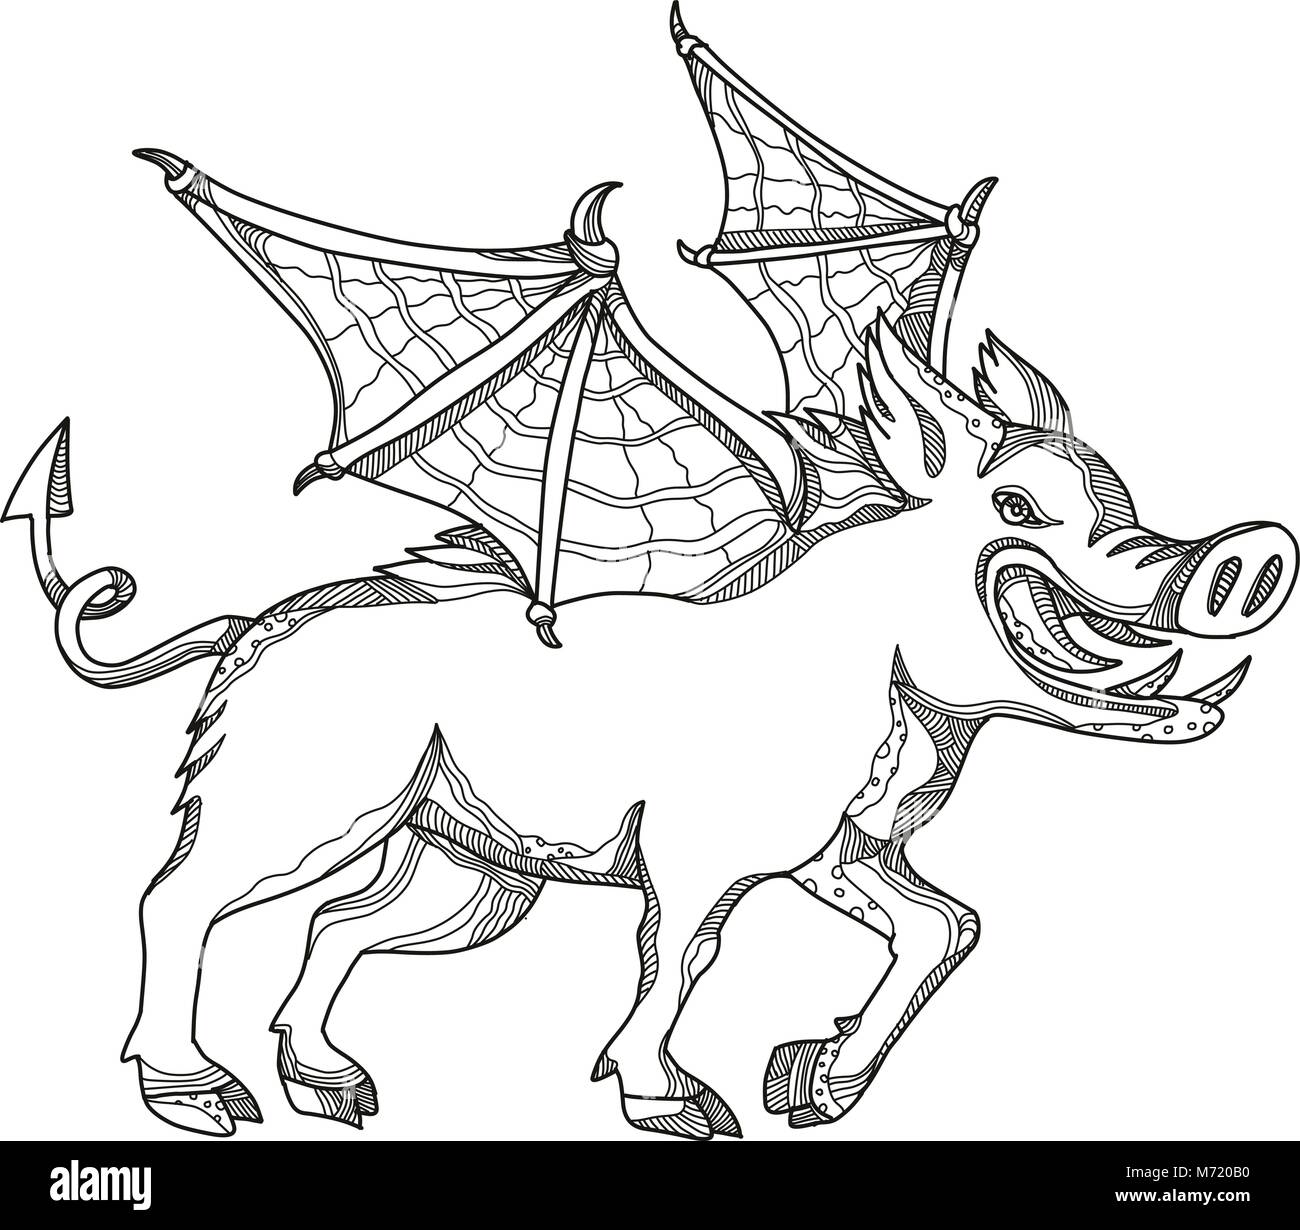 Doodle art illustration of a winged wild boar, swine, pig ,wild swine Eurasian wild pig, hog or Sus scrofa with bat wings done in black and white mand Stock Vector